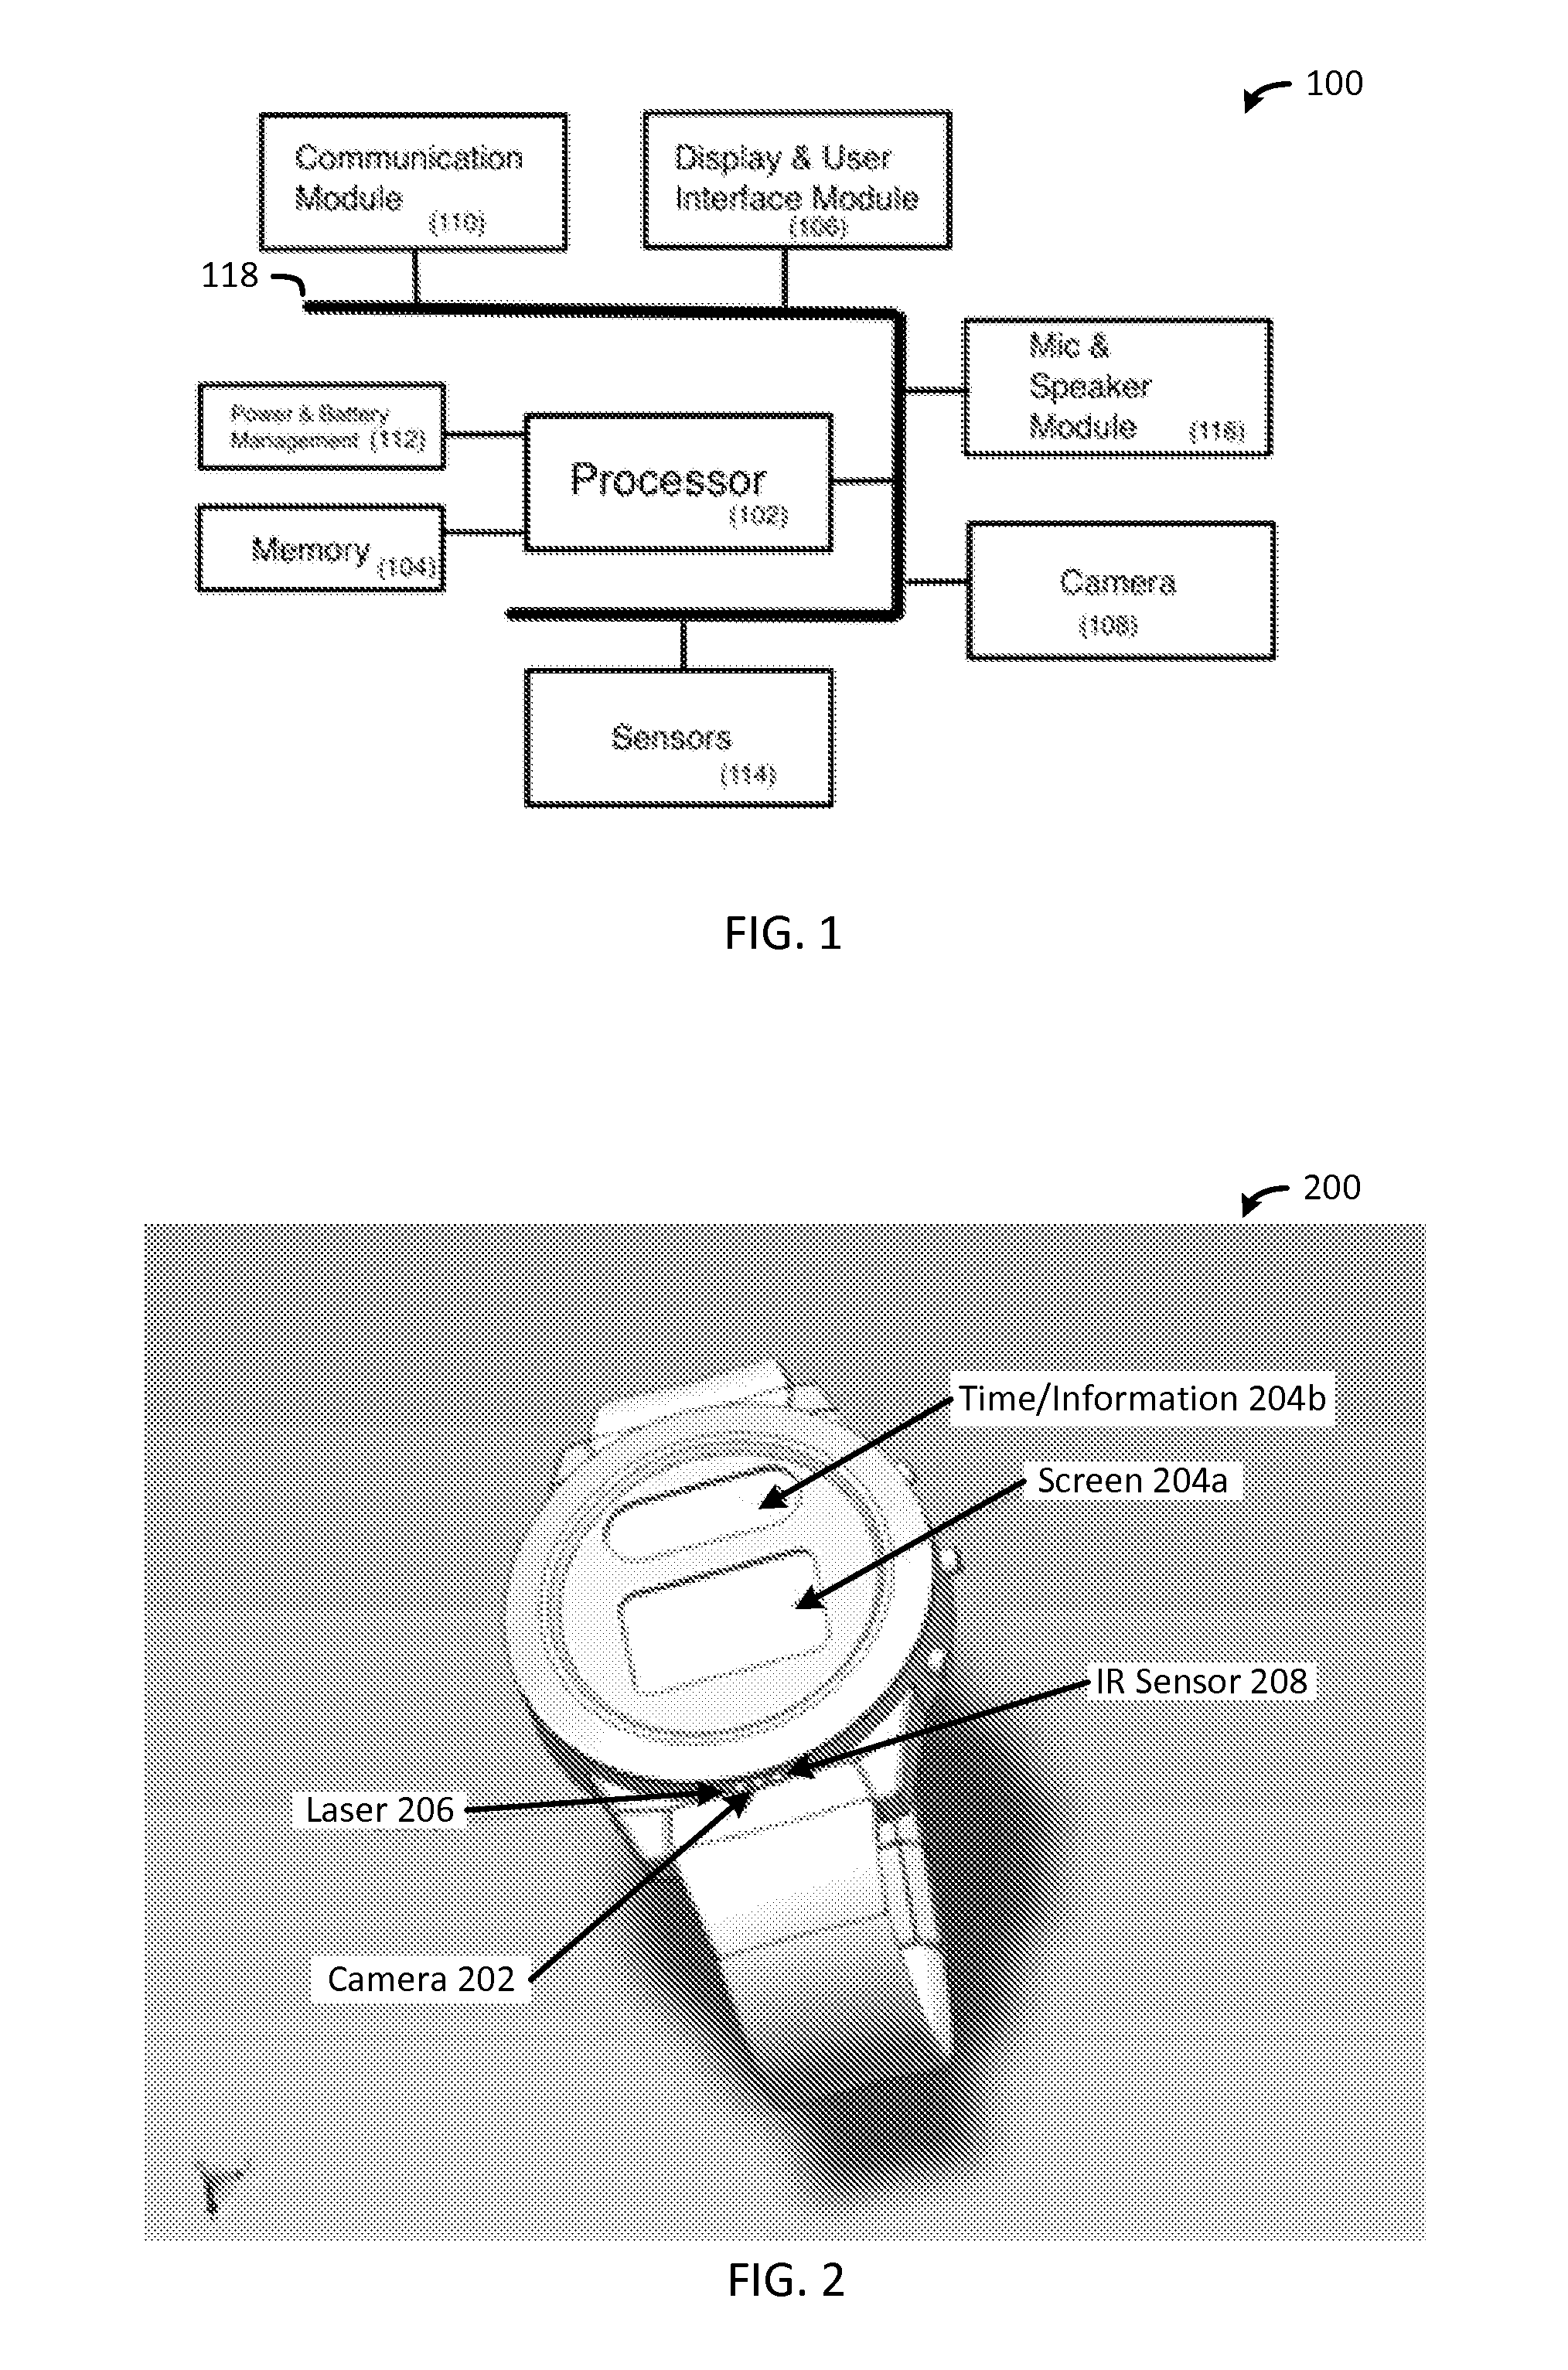 Method and Apparatus for Monitoring Diet and Activity